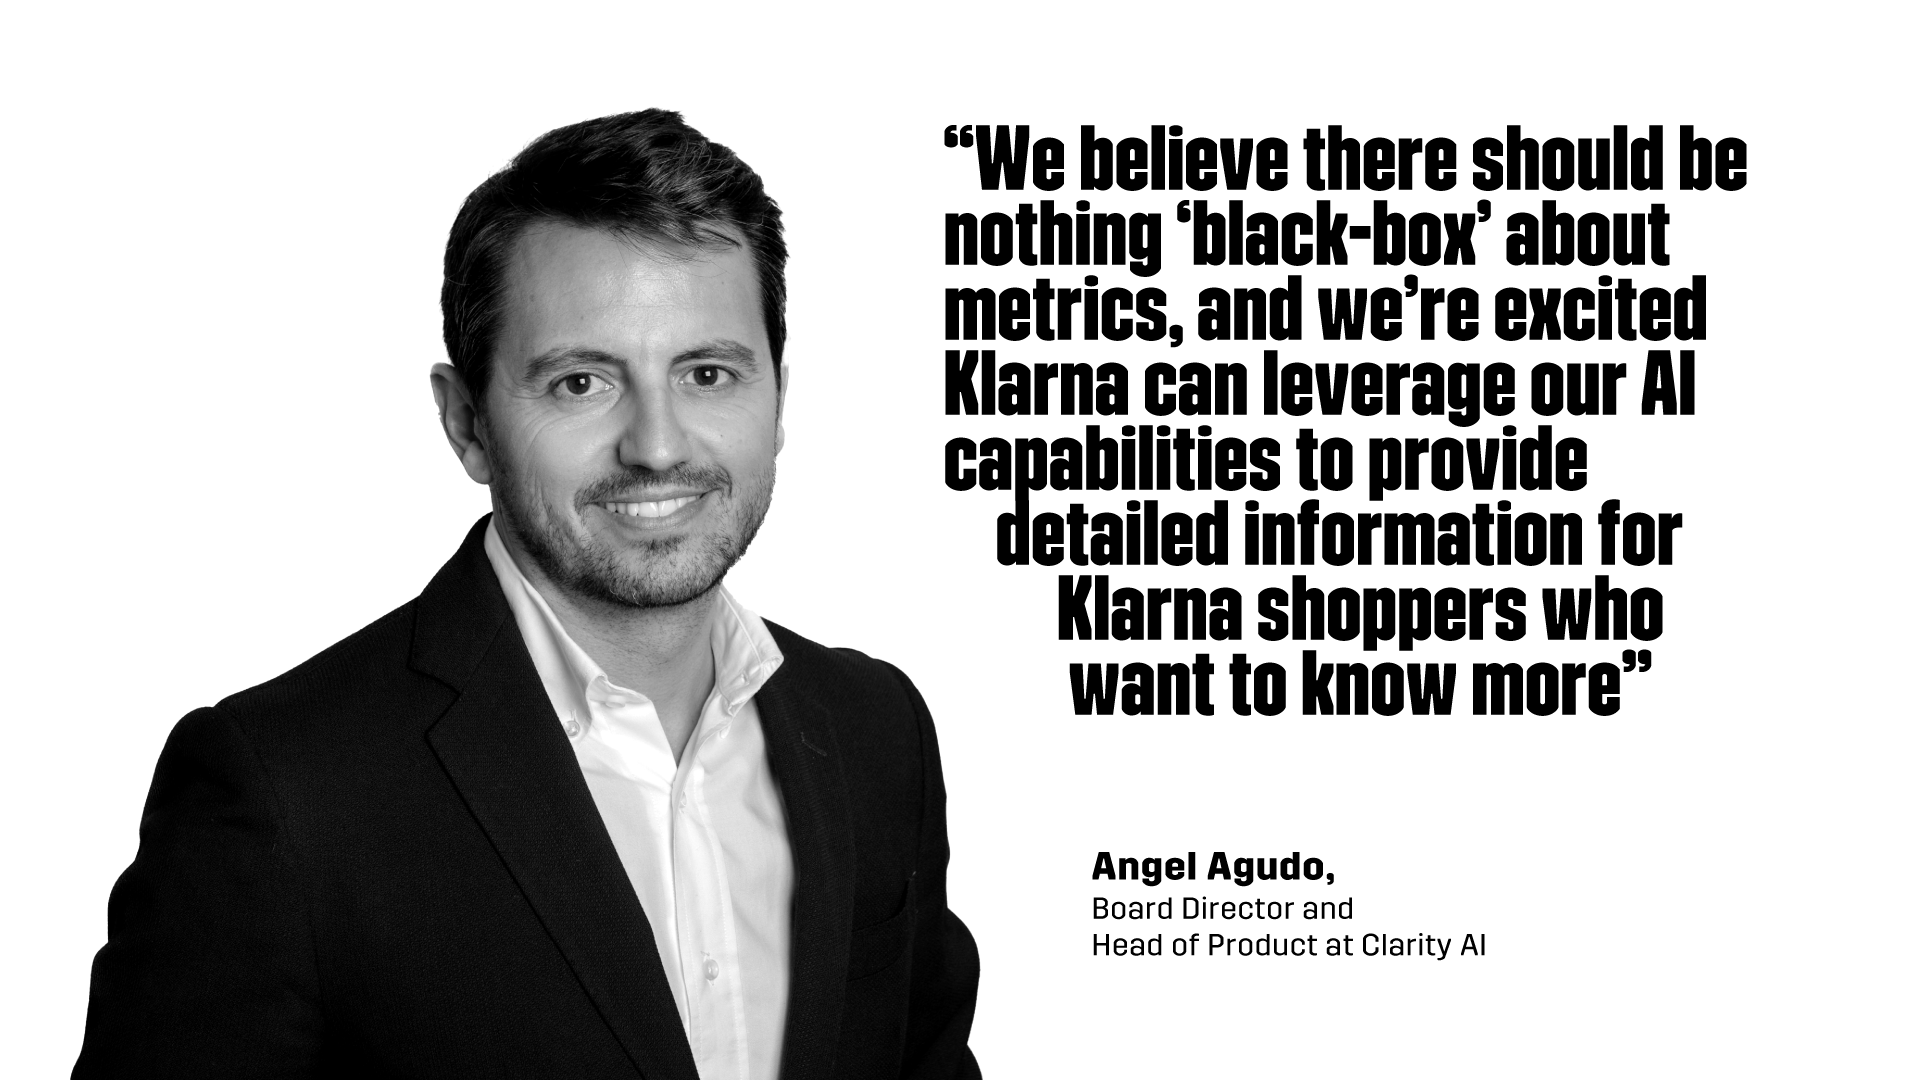 “We believe there should be nothing ‘black-box’ about metrics, and we’re excited Klarna can leverage our AI capabilities to provide detailed information for Klarna shoppers who want to know more” - Angel Agudo, Board Director and Head of Product at Clarity AI